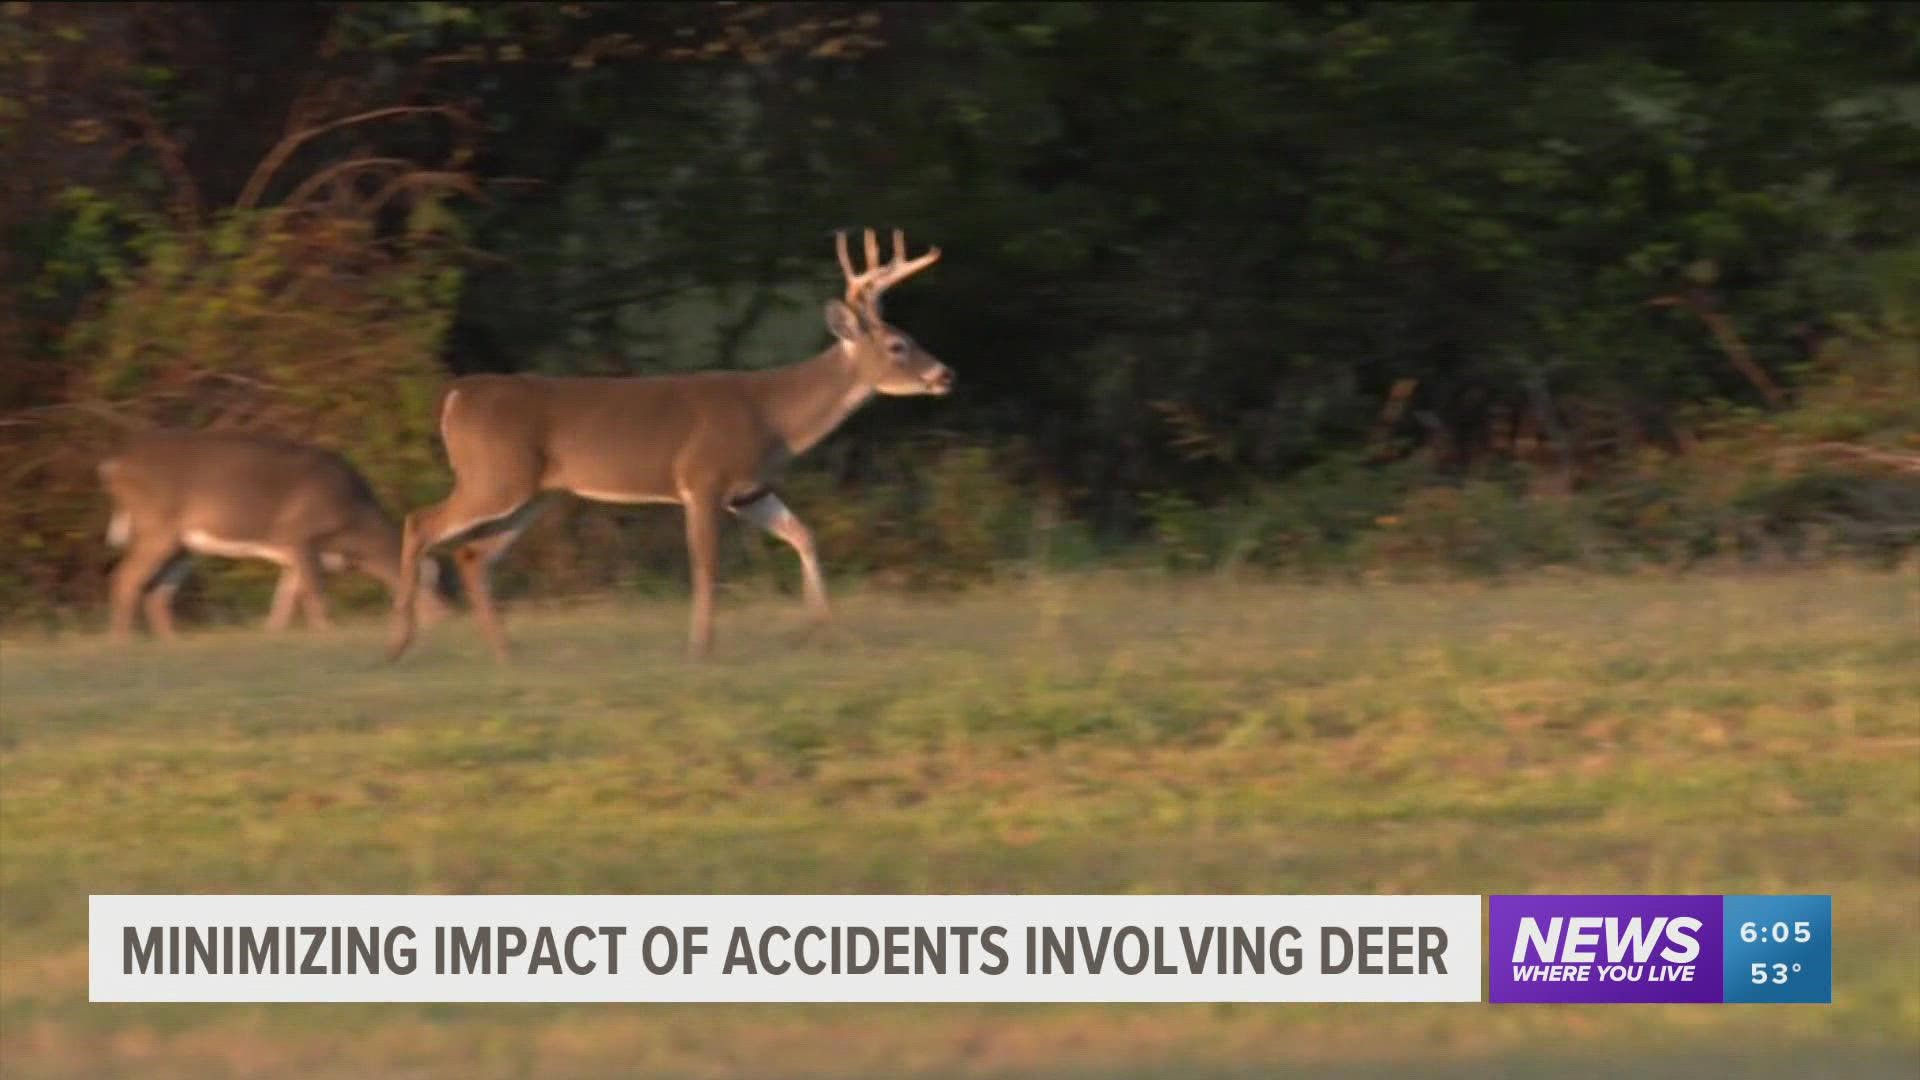 Drivers need to be on the lookout because deer hunting and mating season have begun causing more deer-related car accidents.